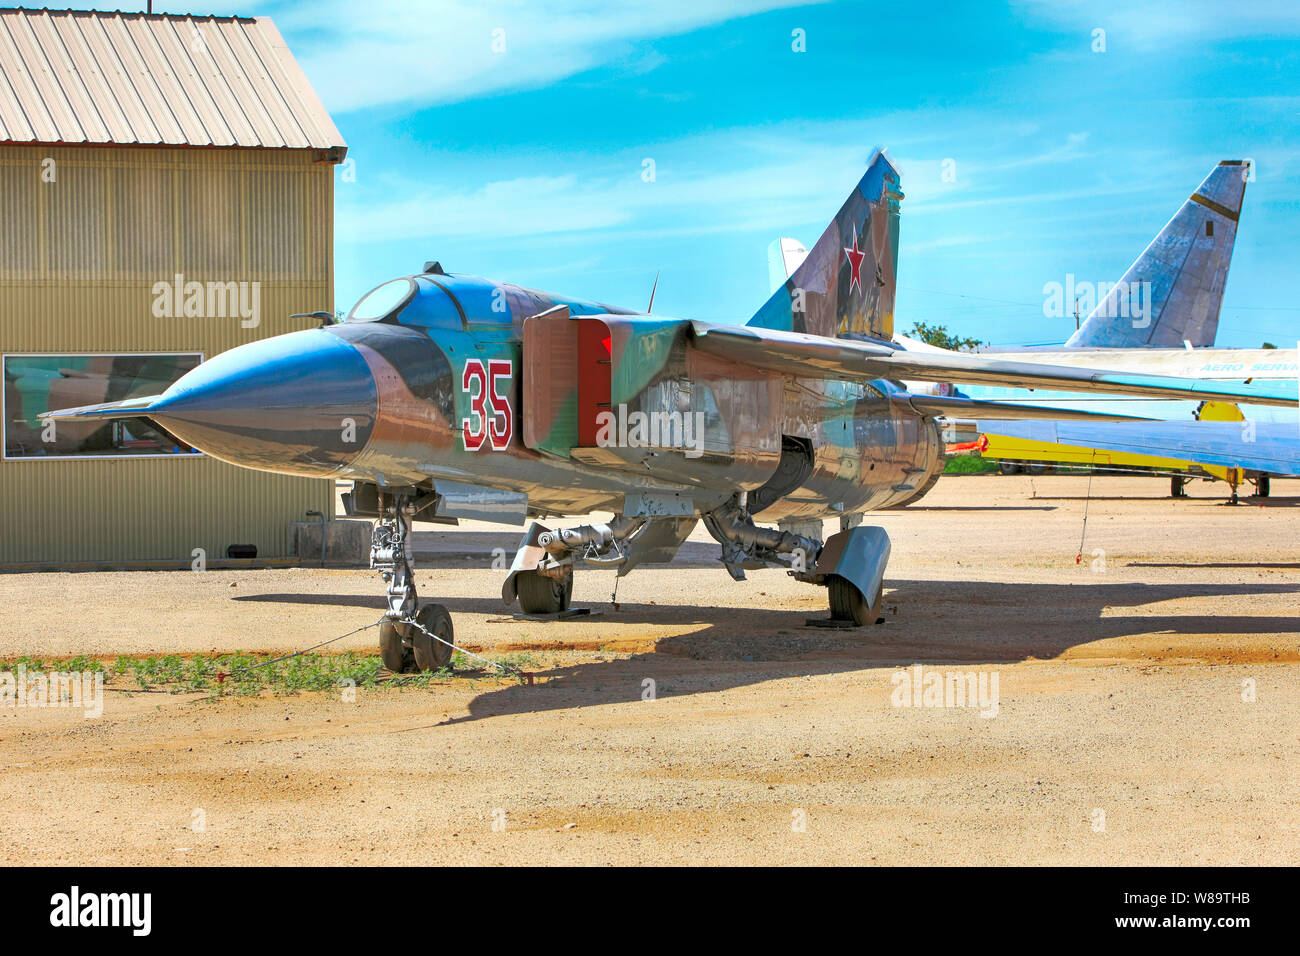 MIG 23 'Flogger' Russian fighter plane on display at the Pima Air & Space Museum in Tucson AZ Stock Photo